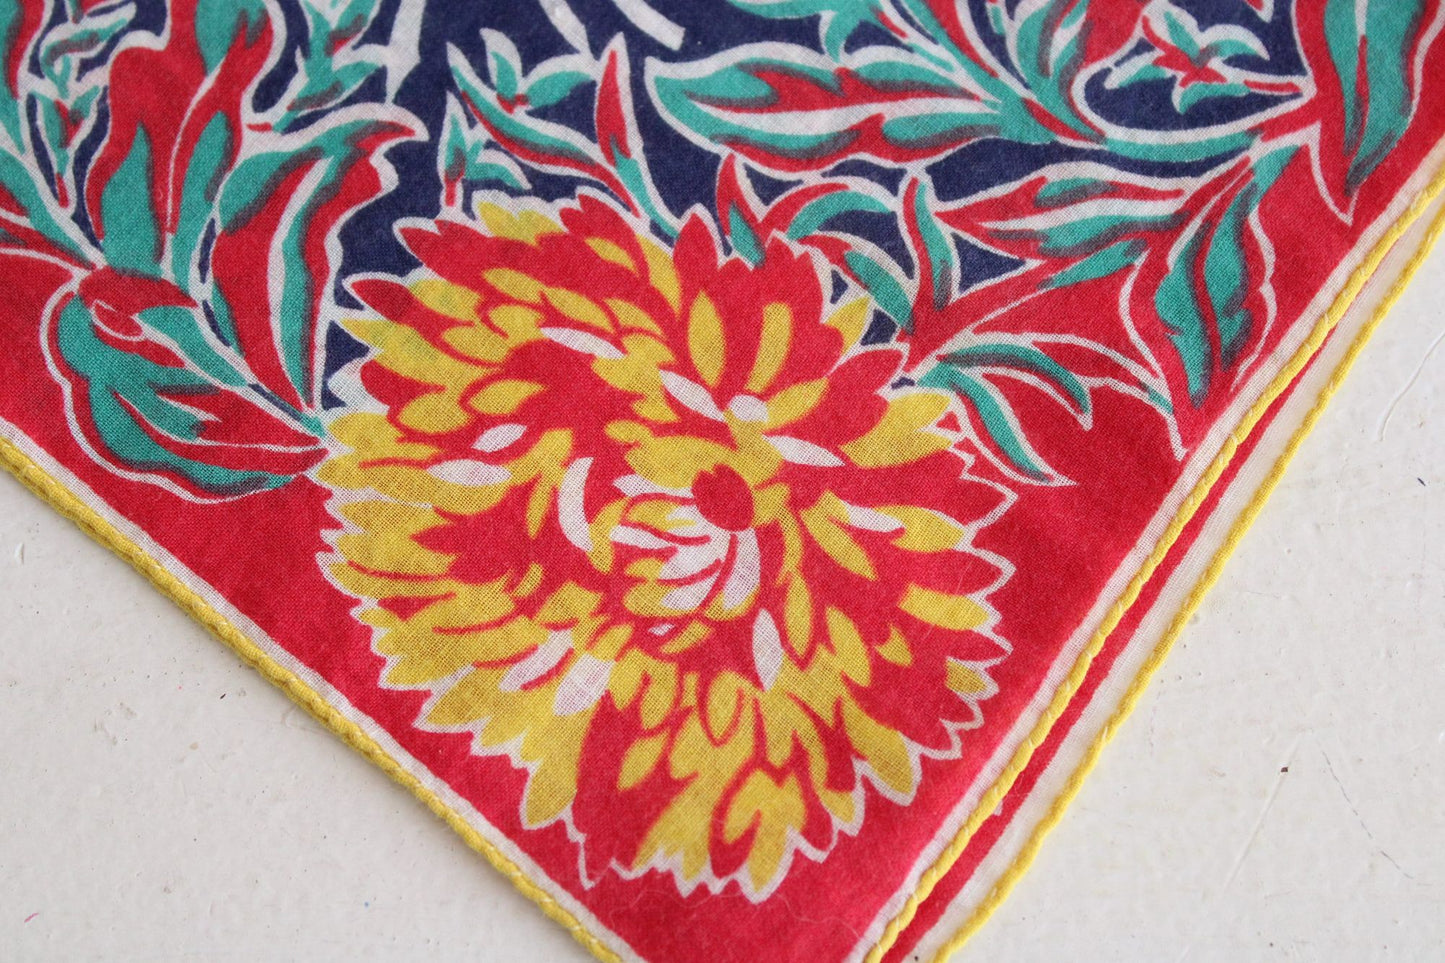 Vintage 1940s Red Blue and Yellow Floral and Leaf Print Hankie